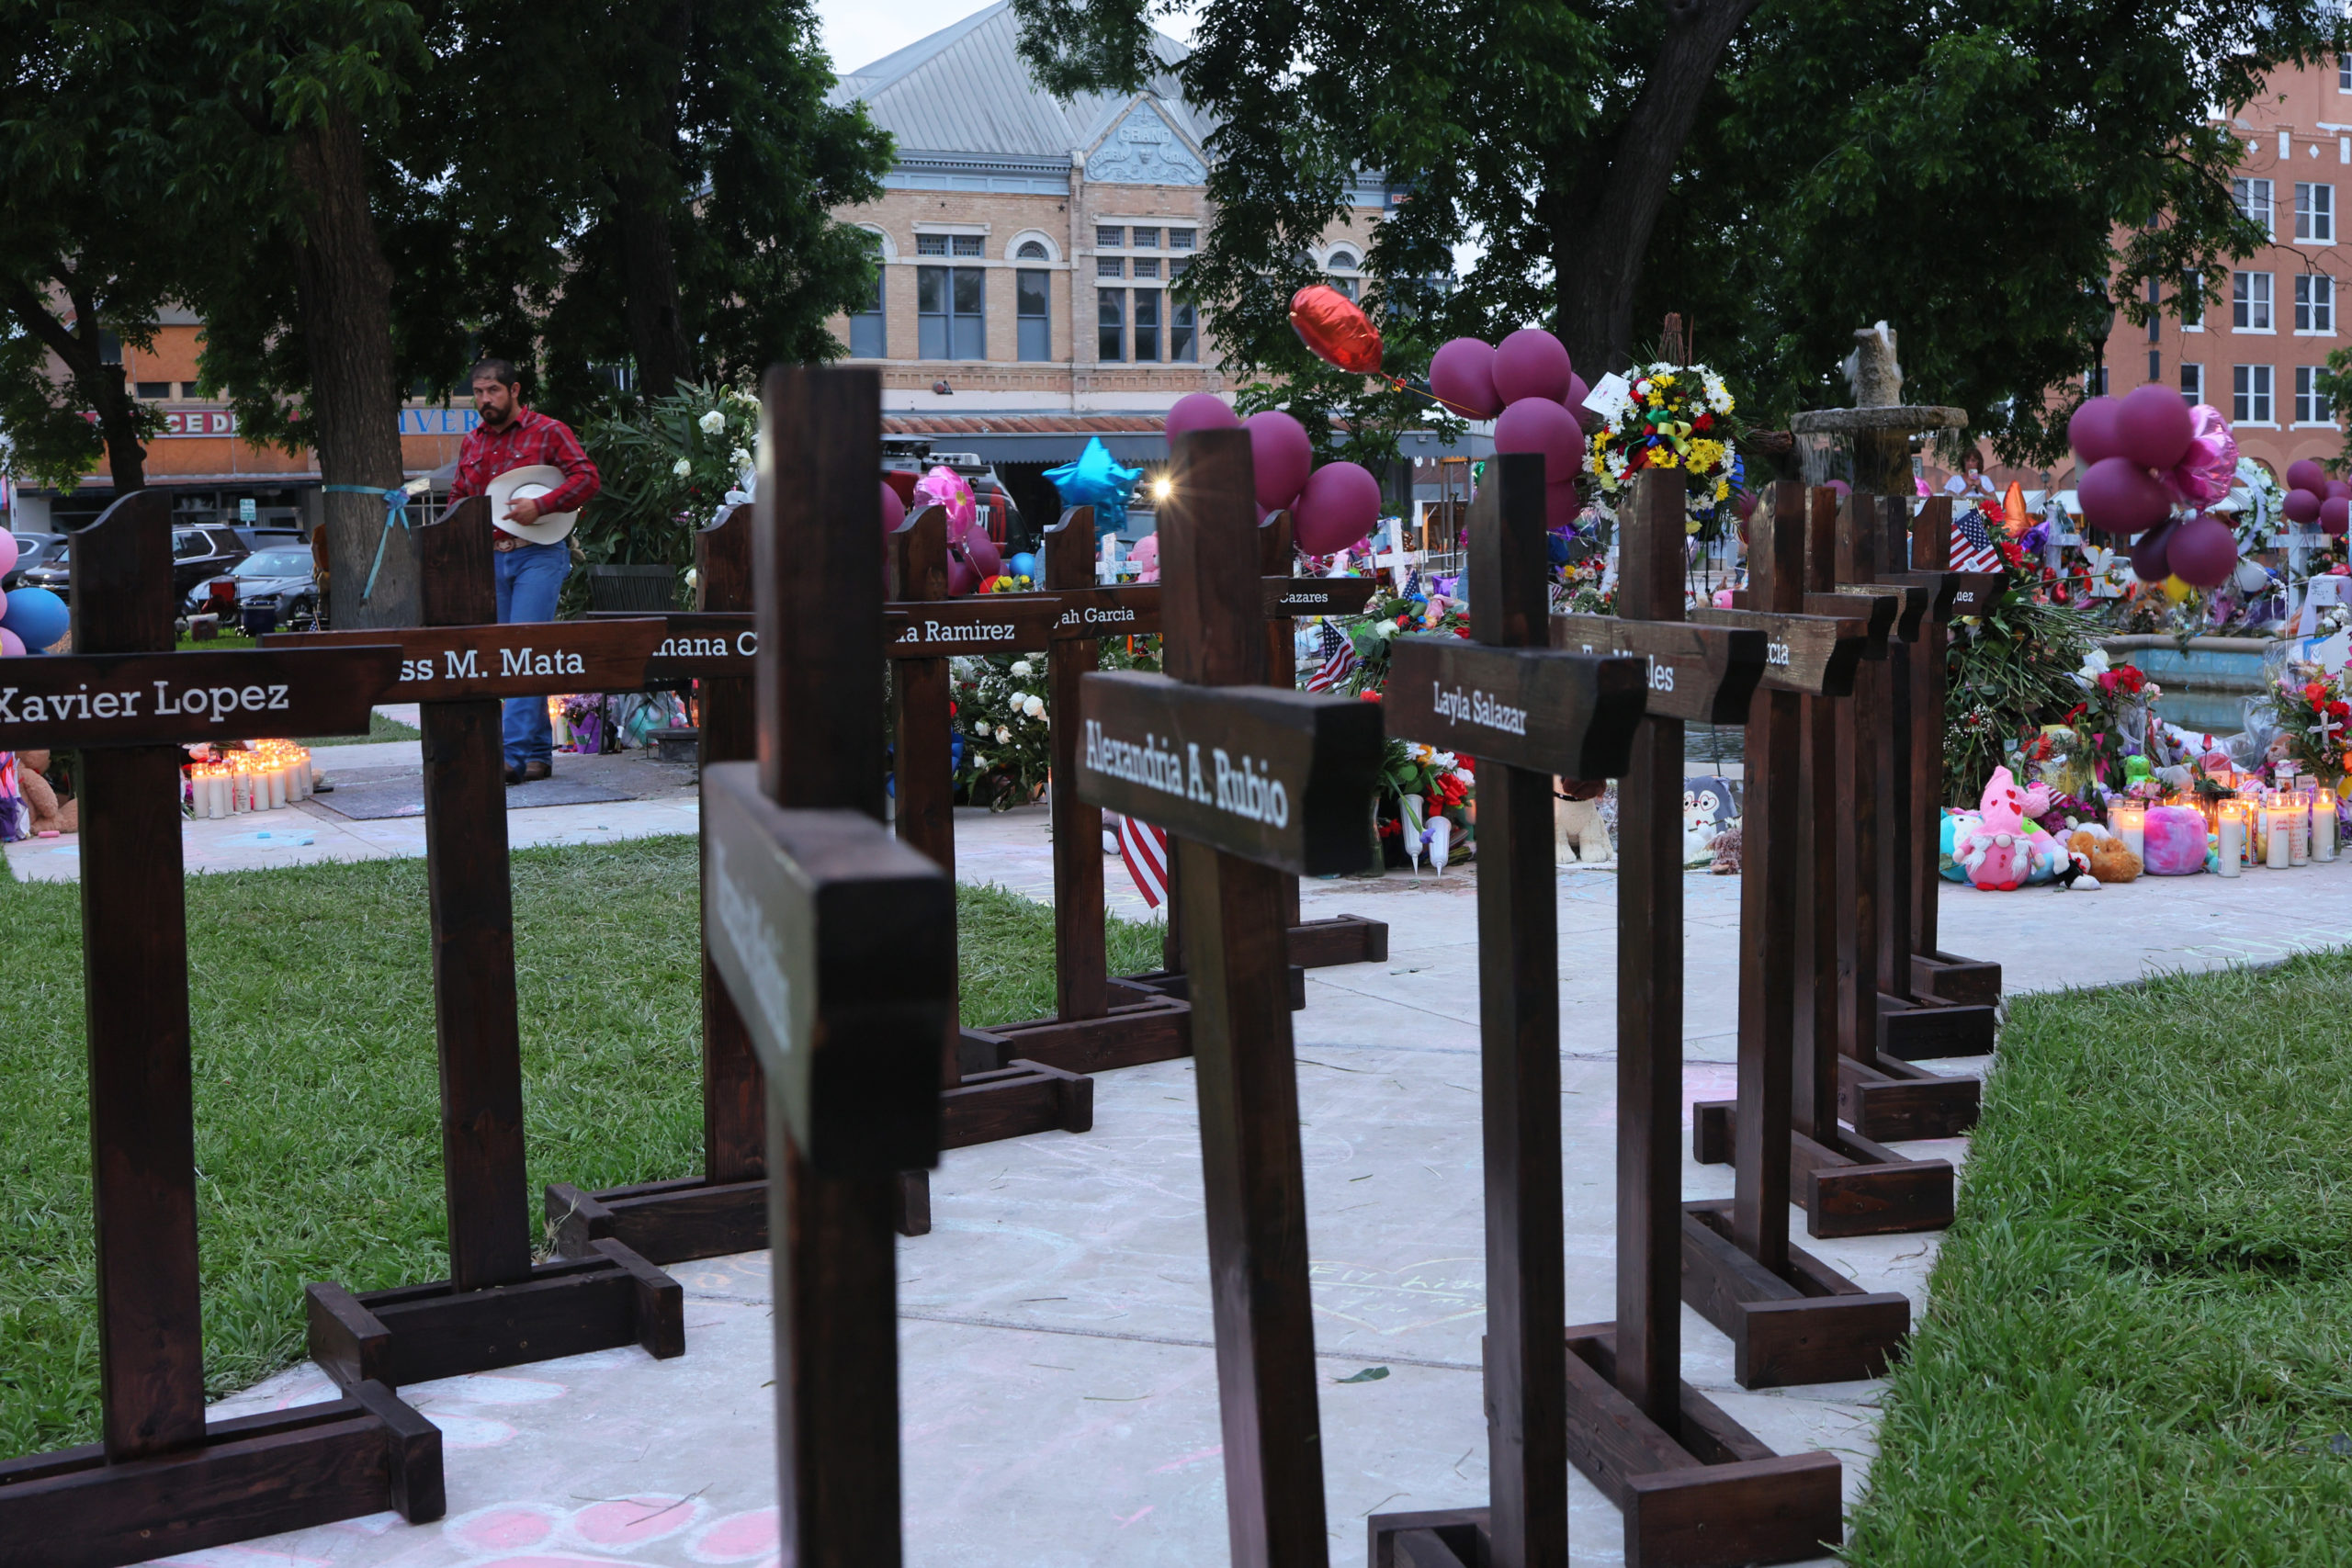 Memorials for the victims of the Robb Elementary School mass shooting are displayed at City of Uvalde Town Square on May 29, 2022 in Uvalde, Texas. 19 children and two adults were killed on May 24th during a mass shooting at Robb Elementary School after man entered the school through an unlocked door and barricaded himself in a classroom where the victims were located. (Photo by Michael M. Santiago/Getty Images)